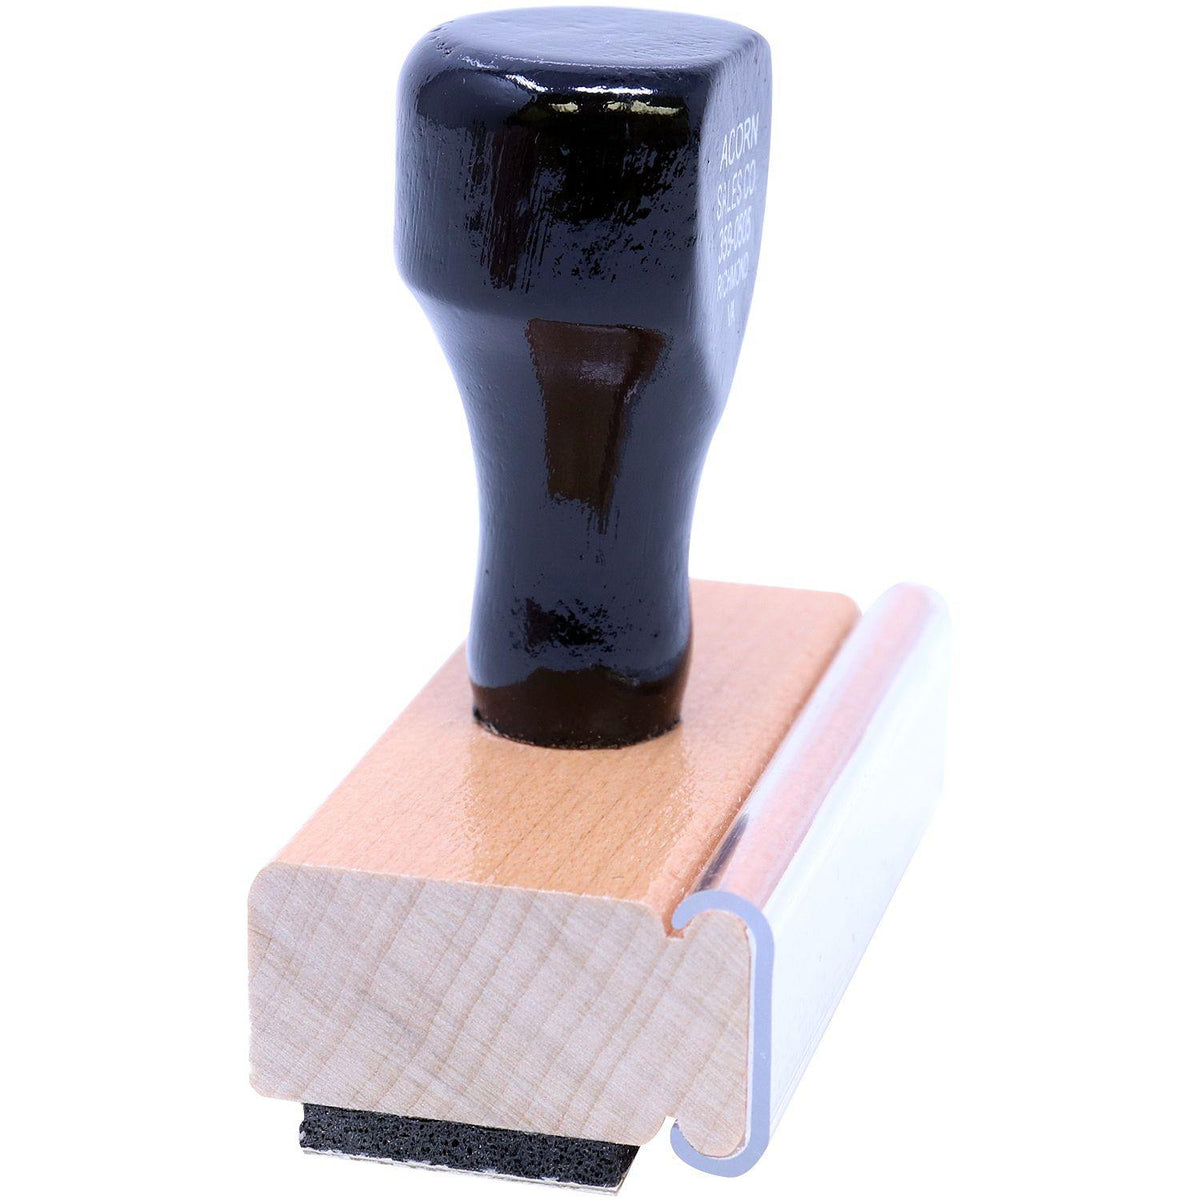 Side View of Large Paid with Box Rubber Stamp at an Angle